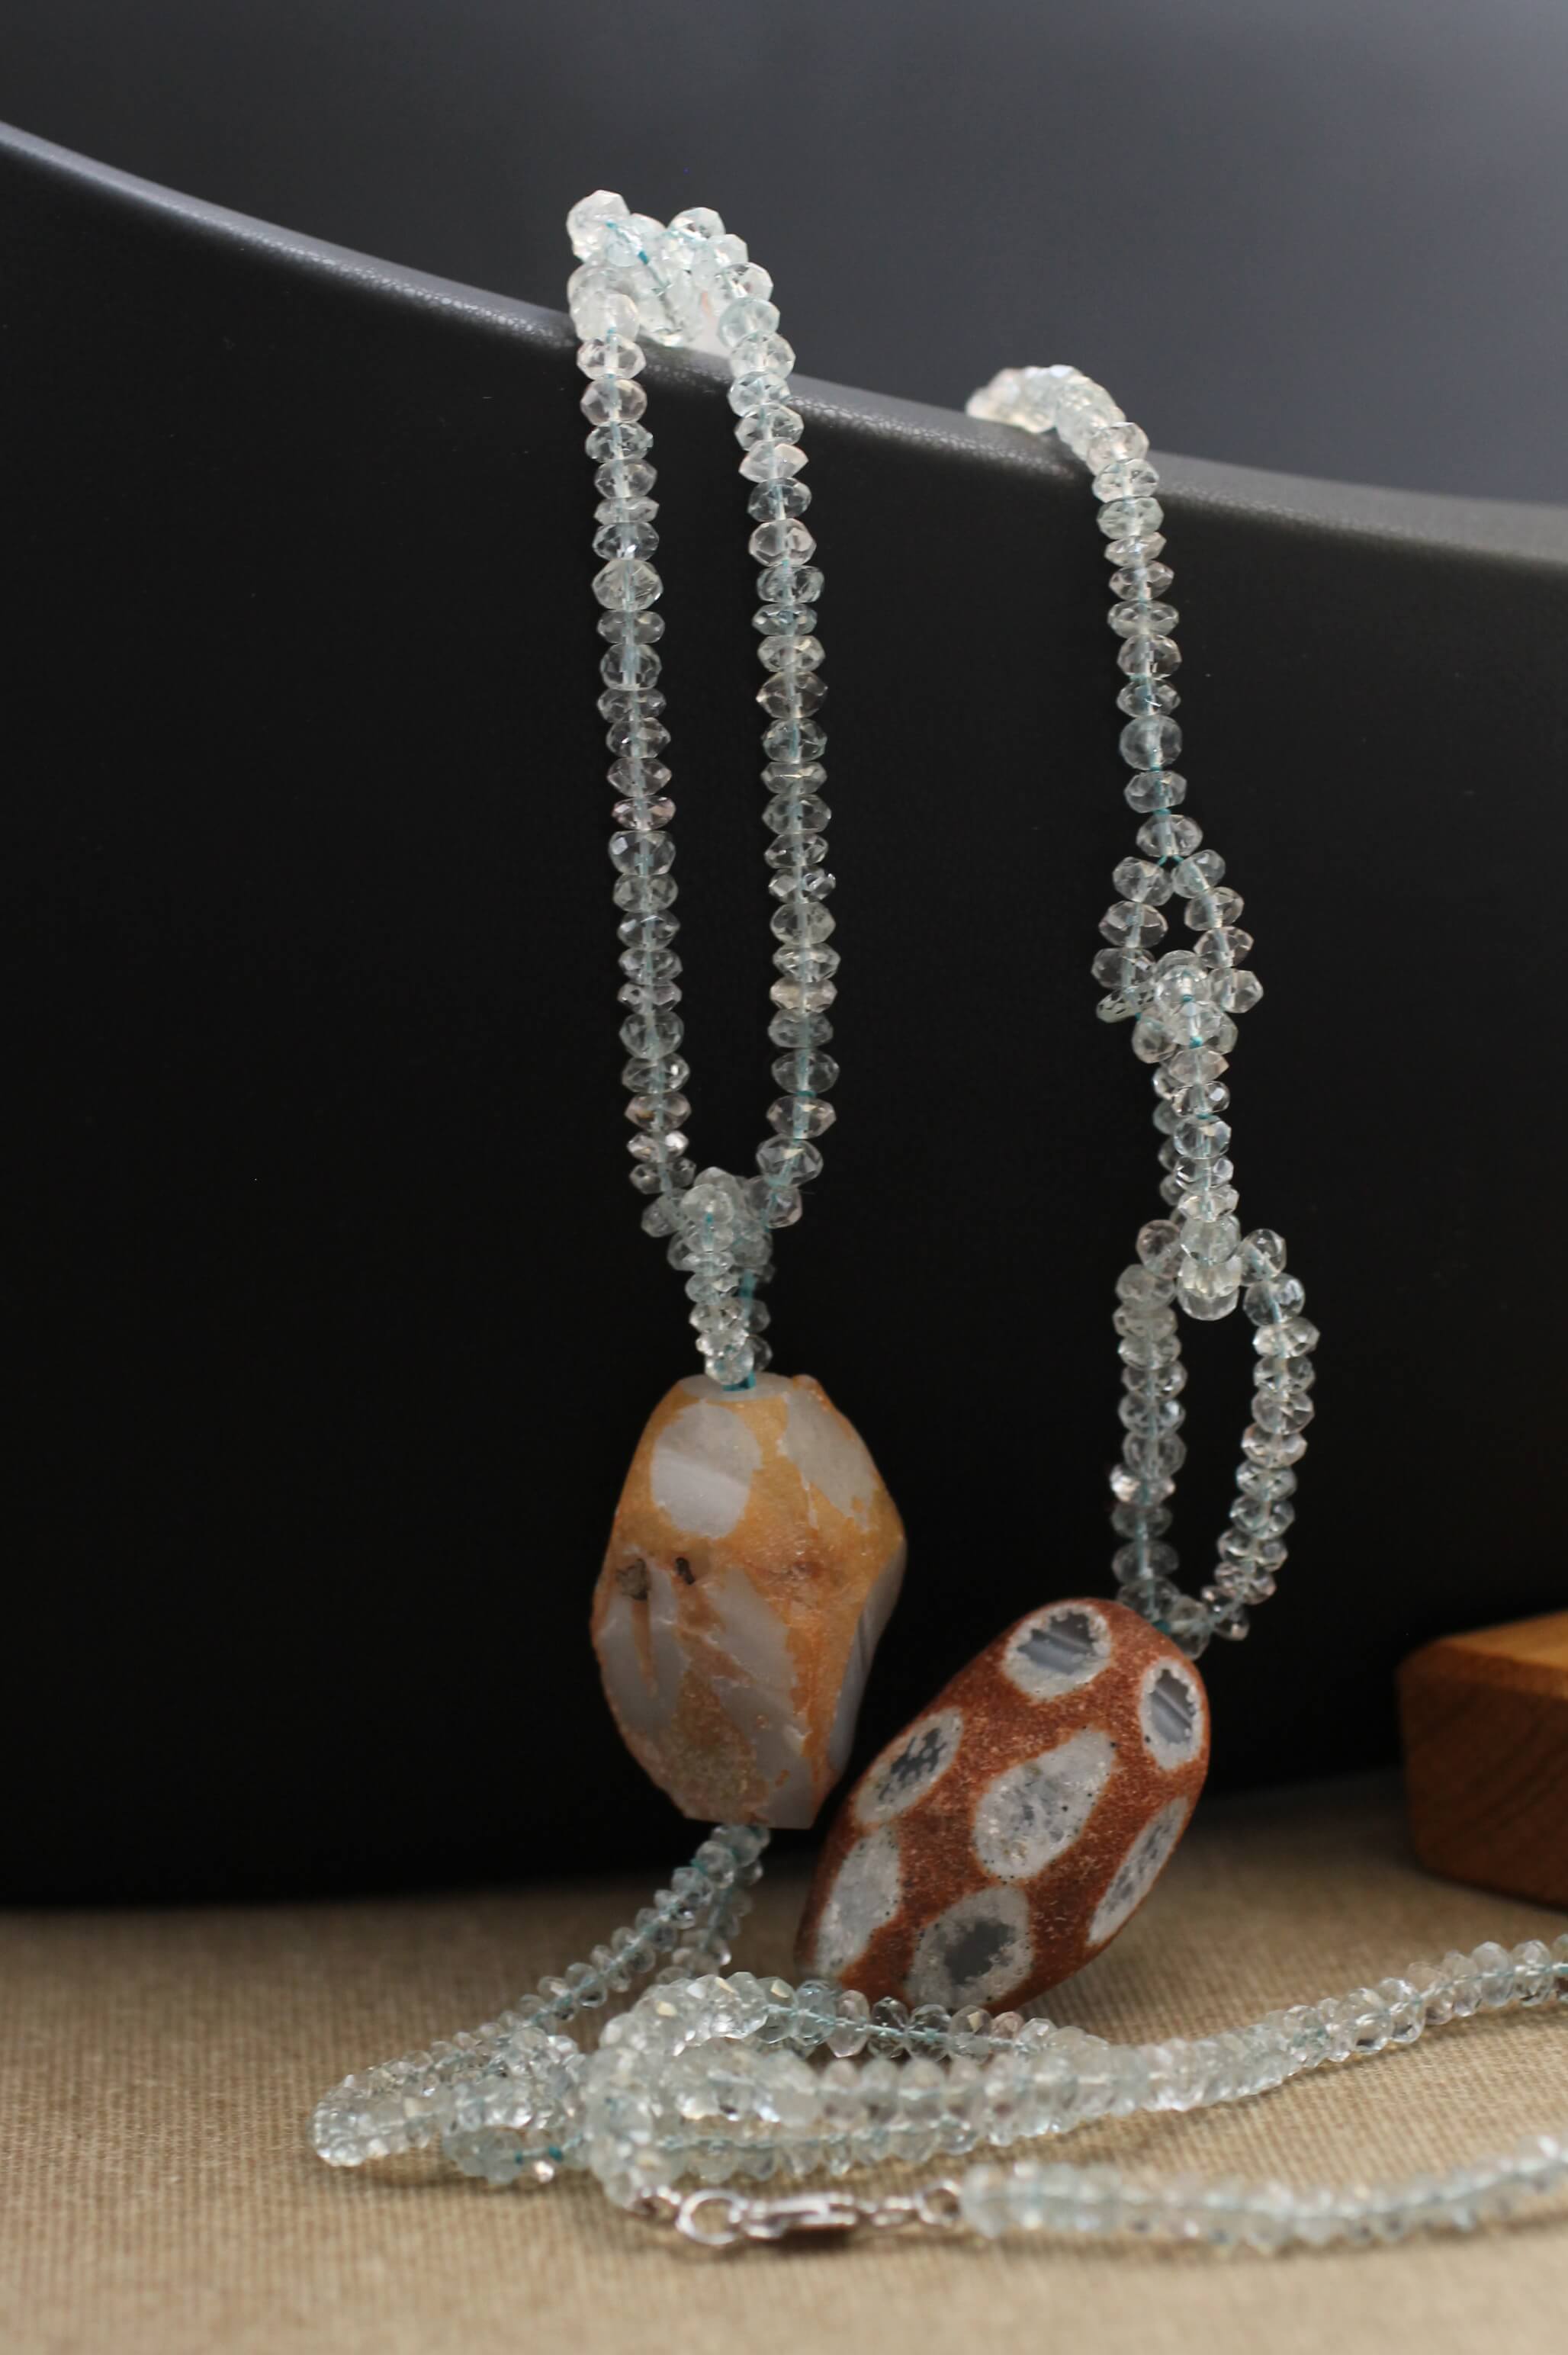 Aquamarine, Chalcedony and white Gold necklace